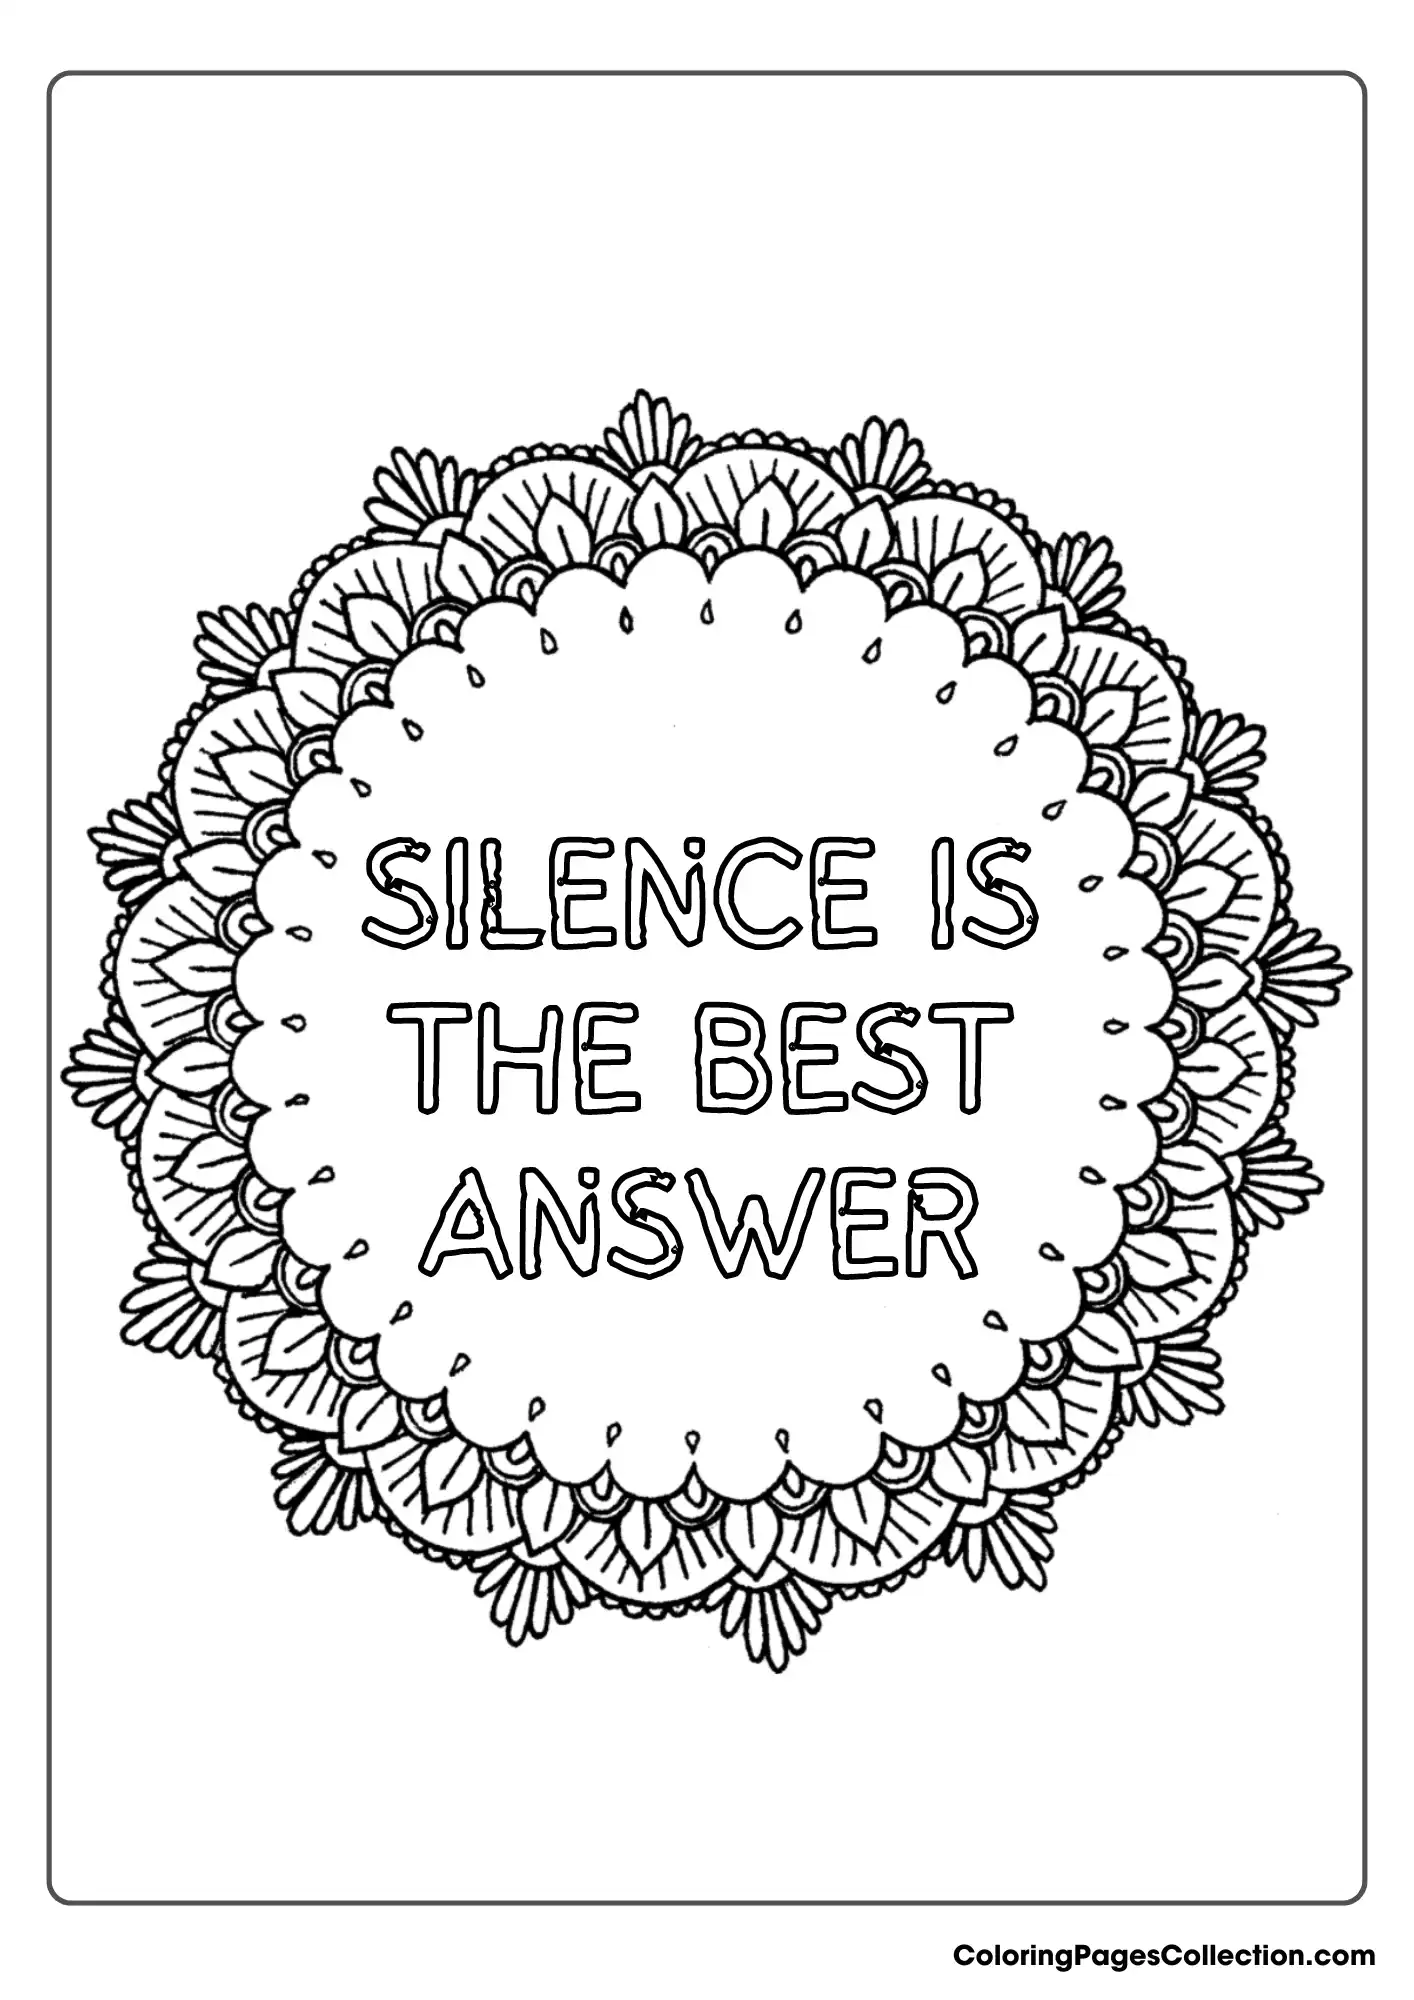 Coloring pages for teens, Silence Is The Best Answer